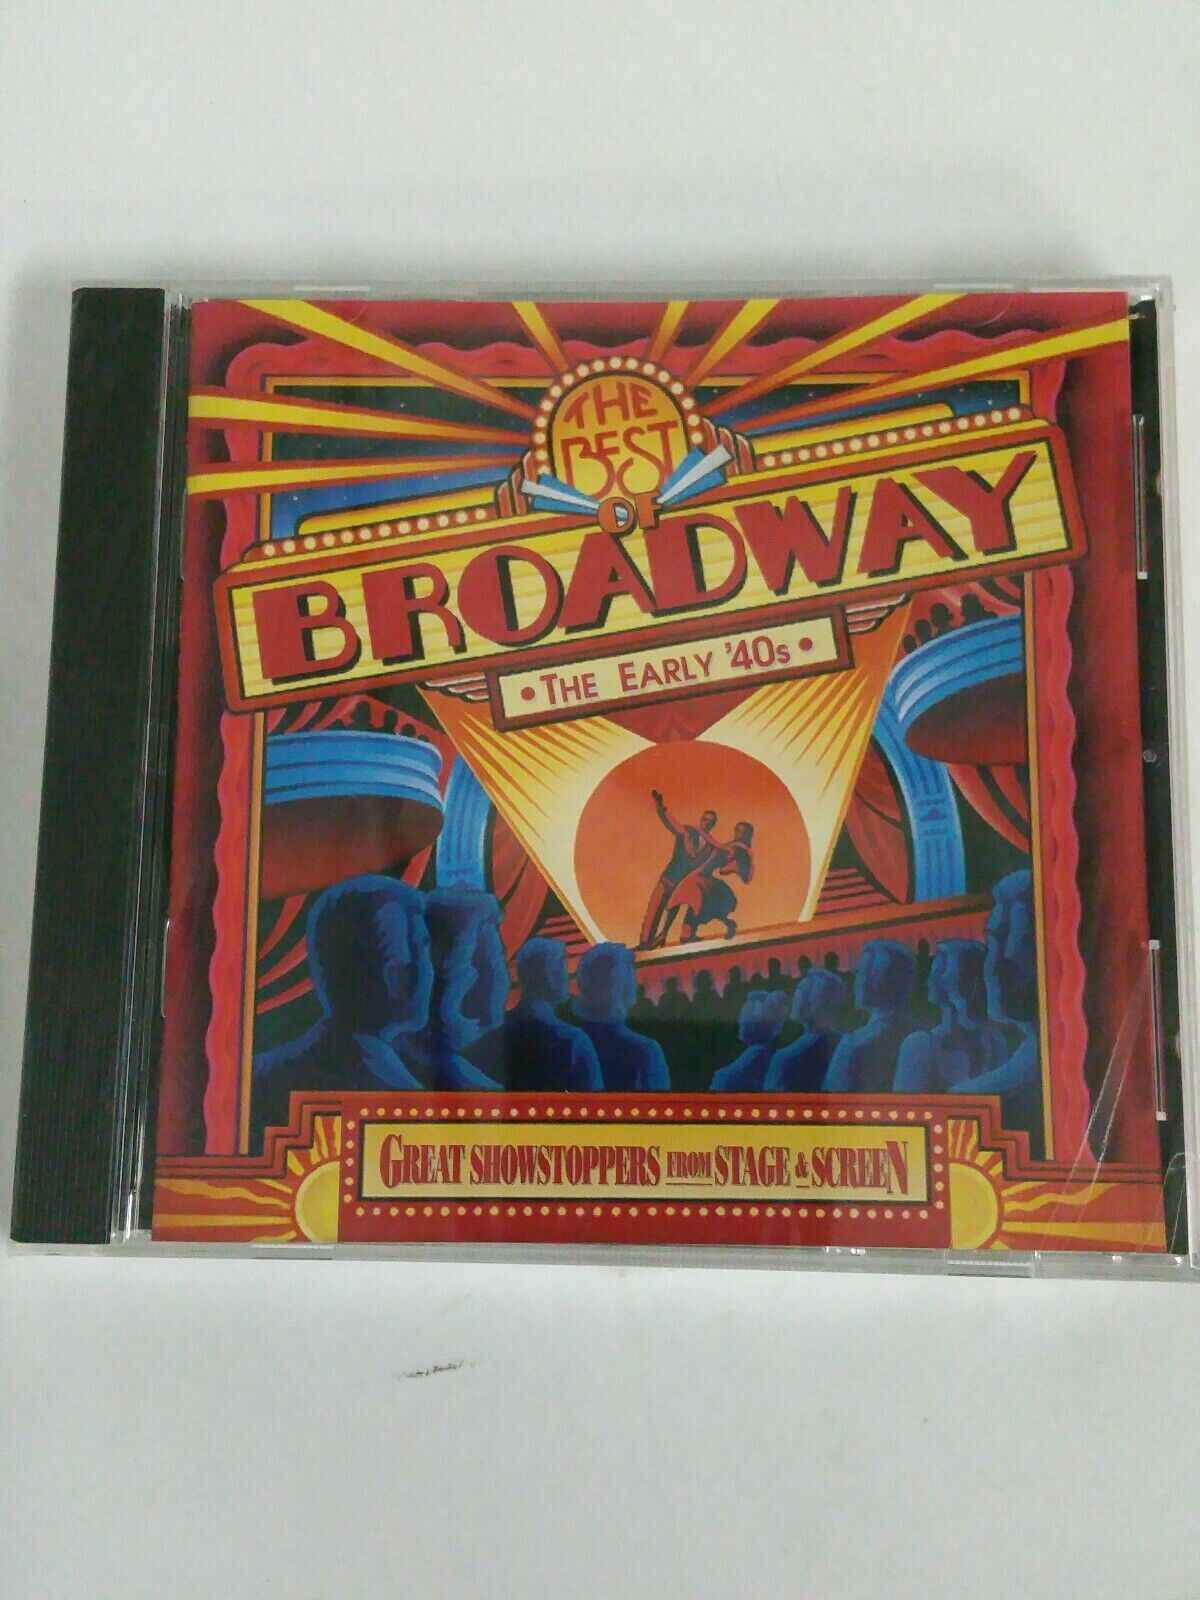 BROADWAY EARLY 40S CD Ee1f